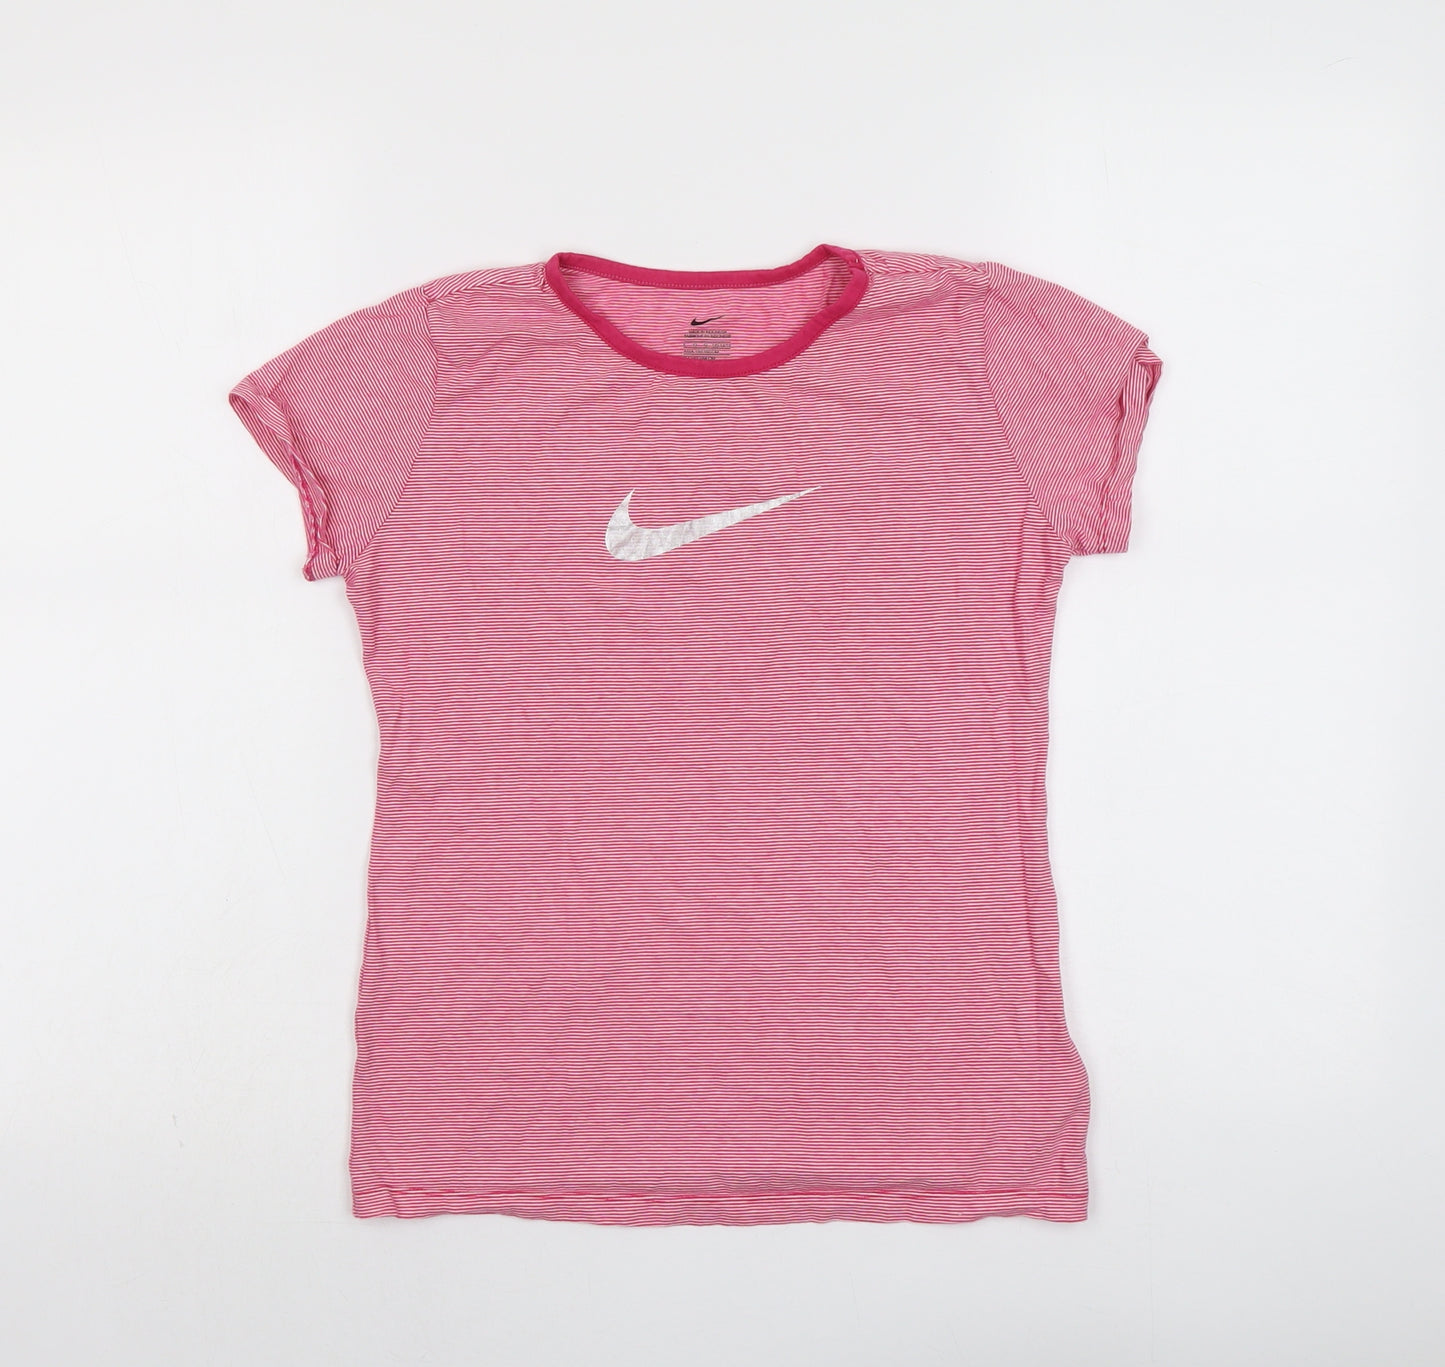 Nike Girls Pink Striped Cotton Basic T-Shirt Size 12-13 Years Round Neck Pullover